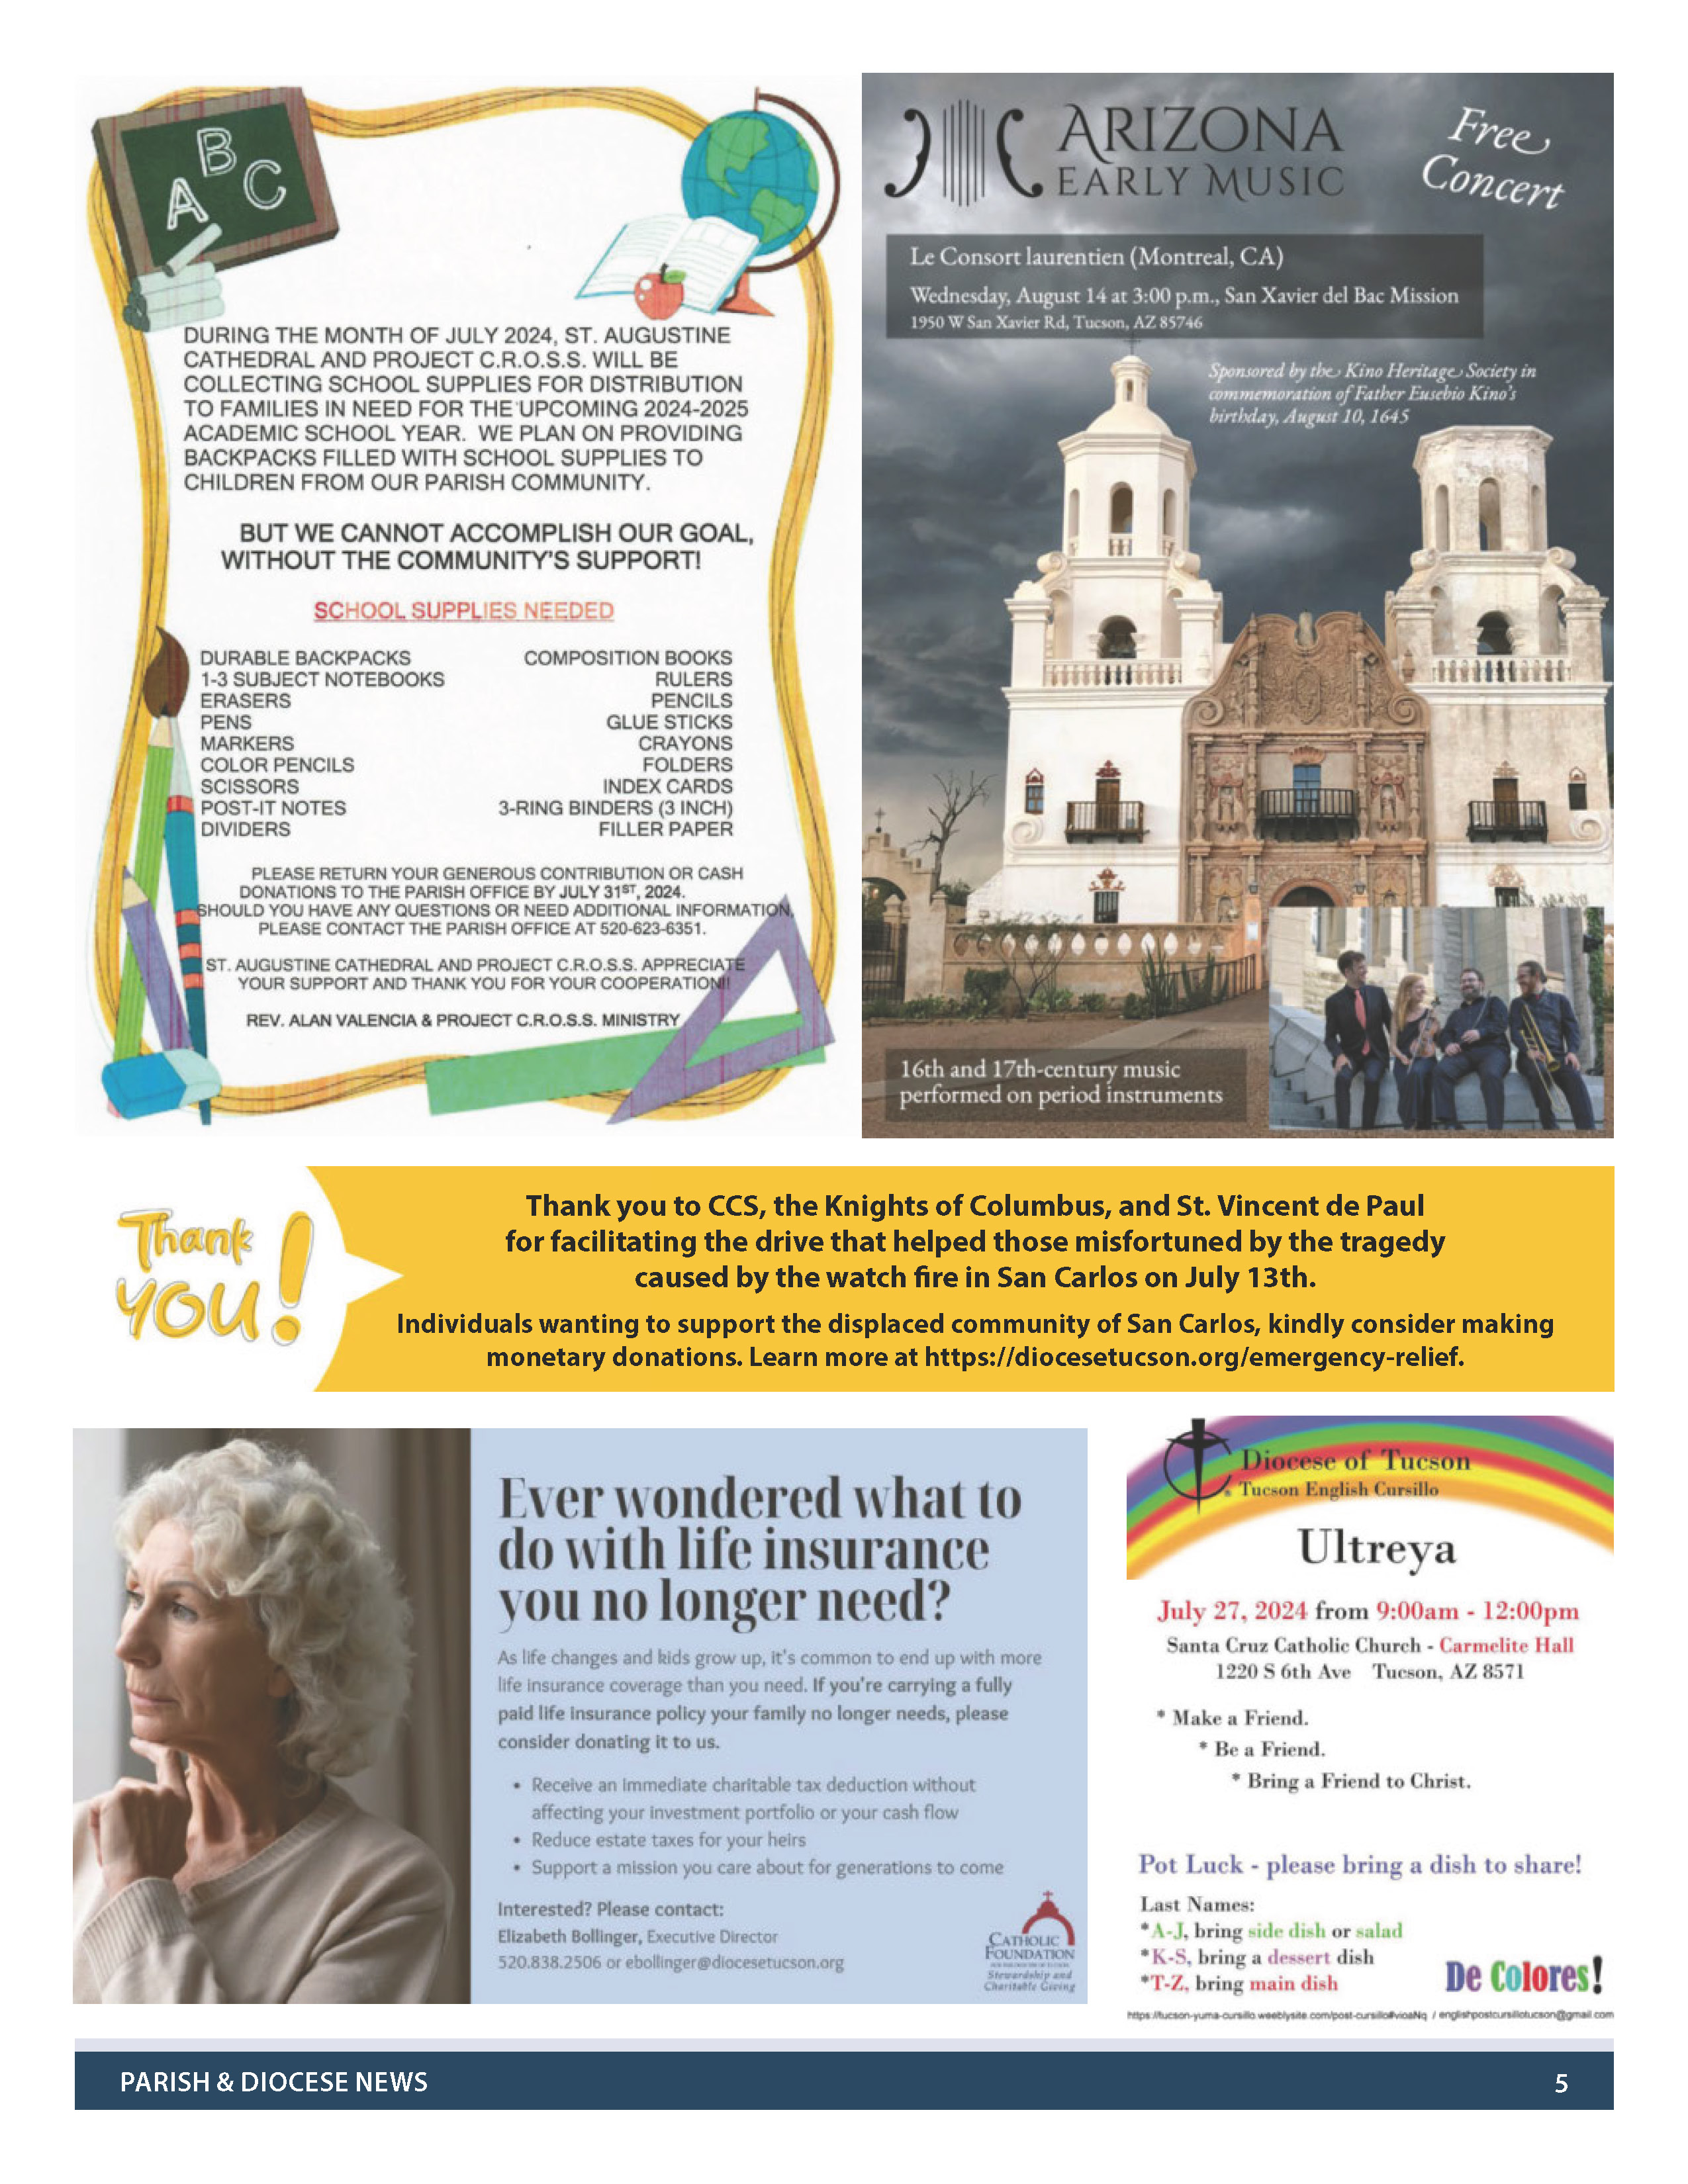 St. Augustine Cathedral Tucson Bulletin page 5